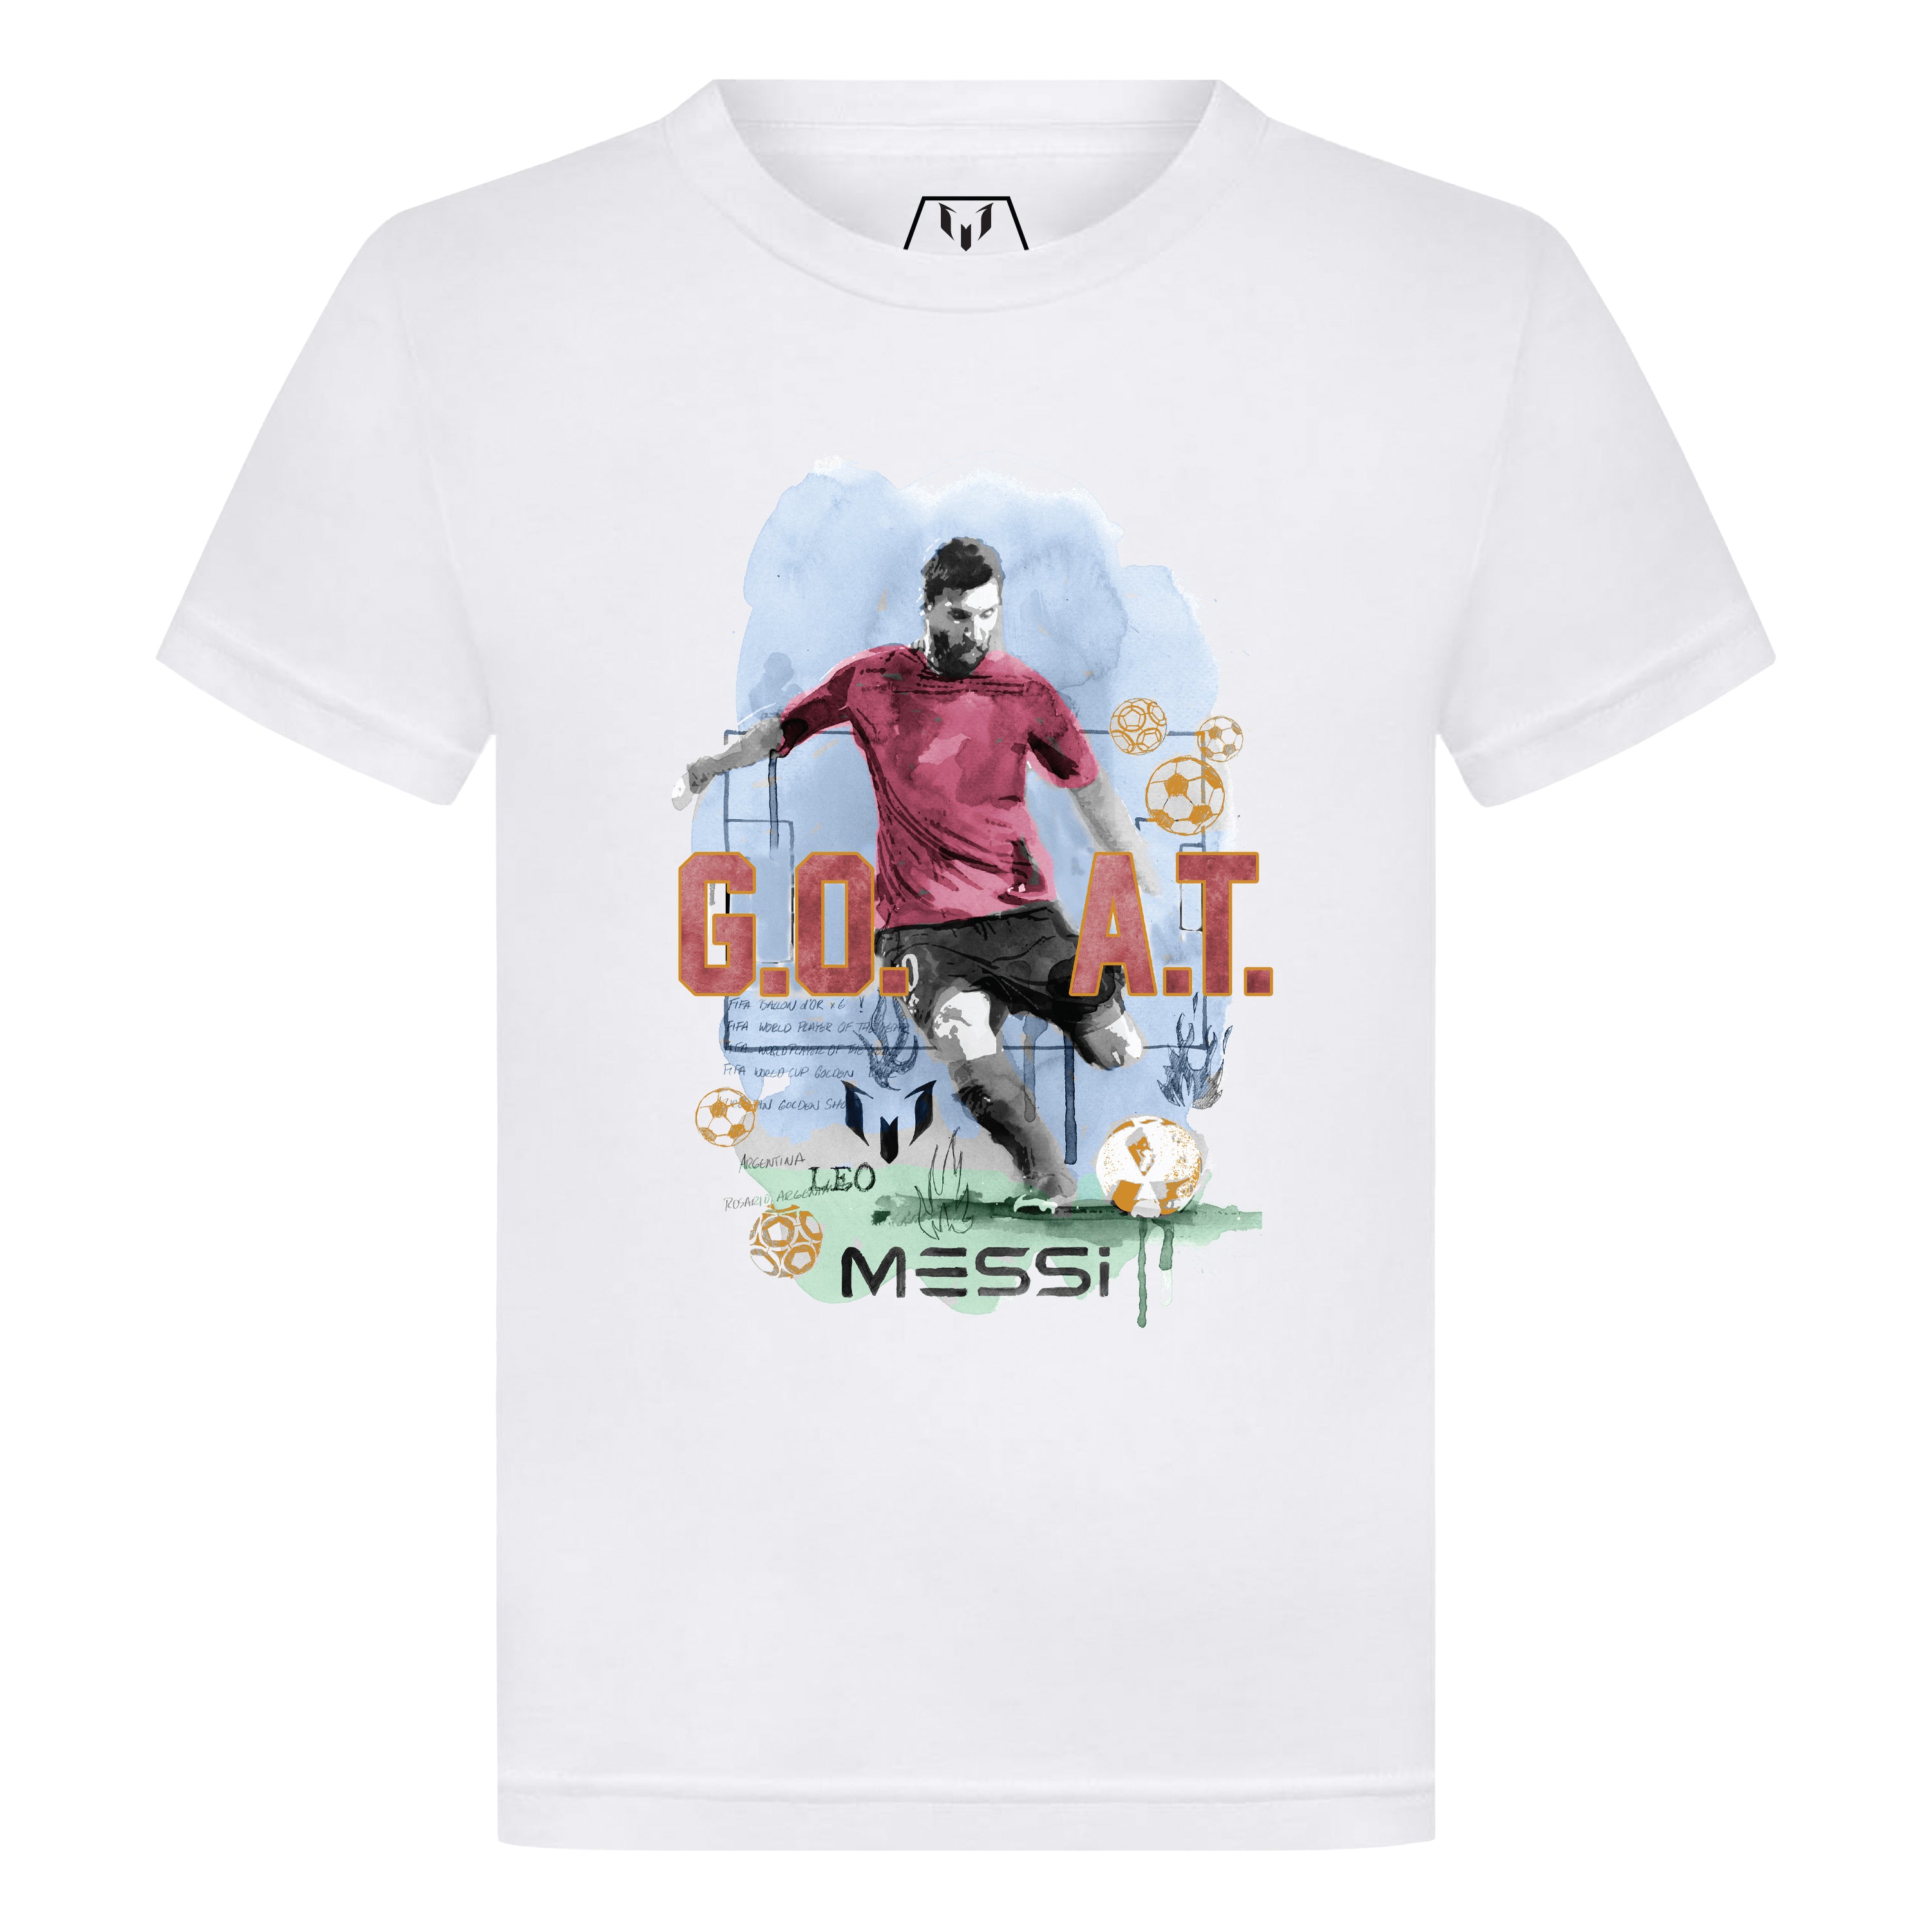 The G.O.A.T. Kid's Graphic T-Shirt